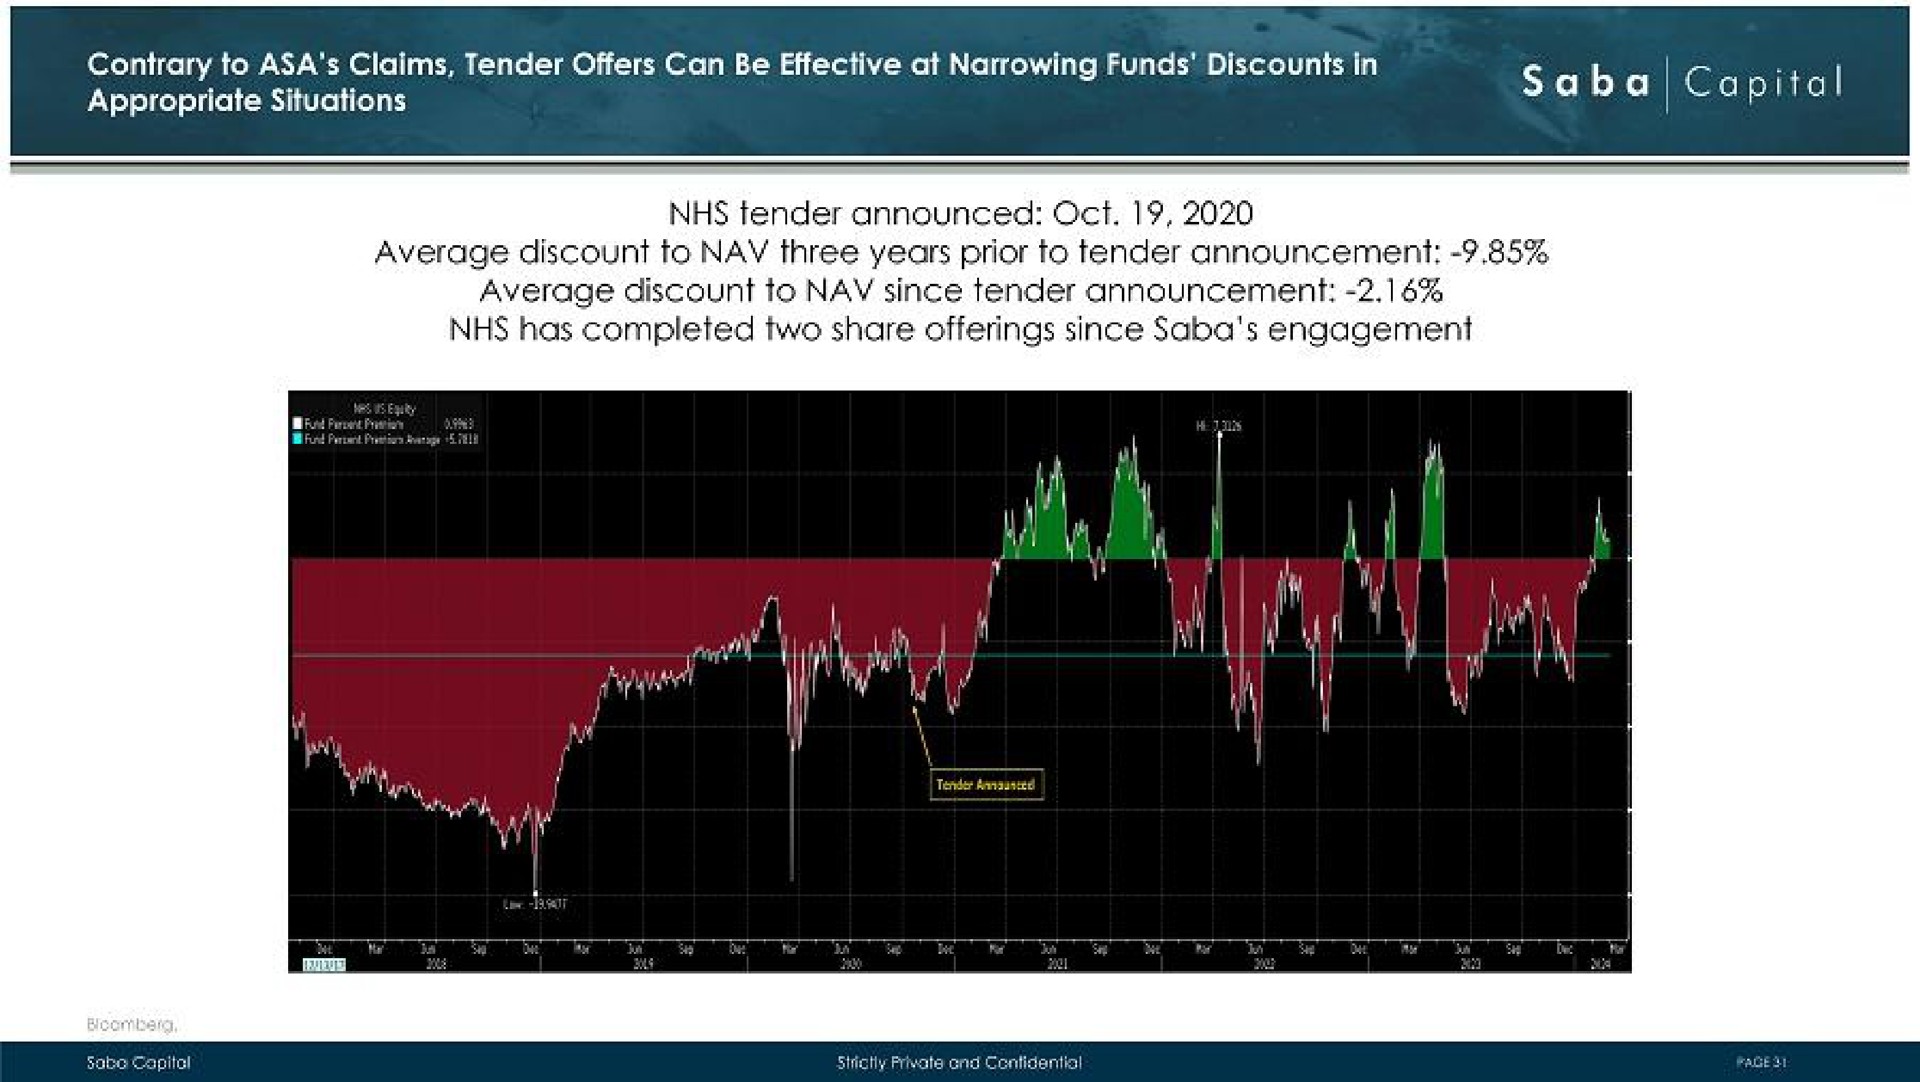 contrary to claims tender offers can be effective at narrowing funds discounts in tol no aged tender announced average discount three years prior to tender announcement average discount to nay since tender announcement has completed two share offerings since engagement | Saba Capital Management